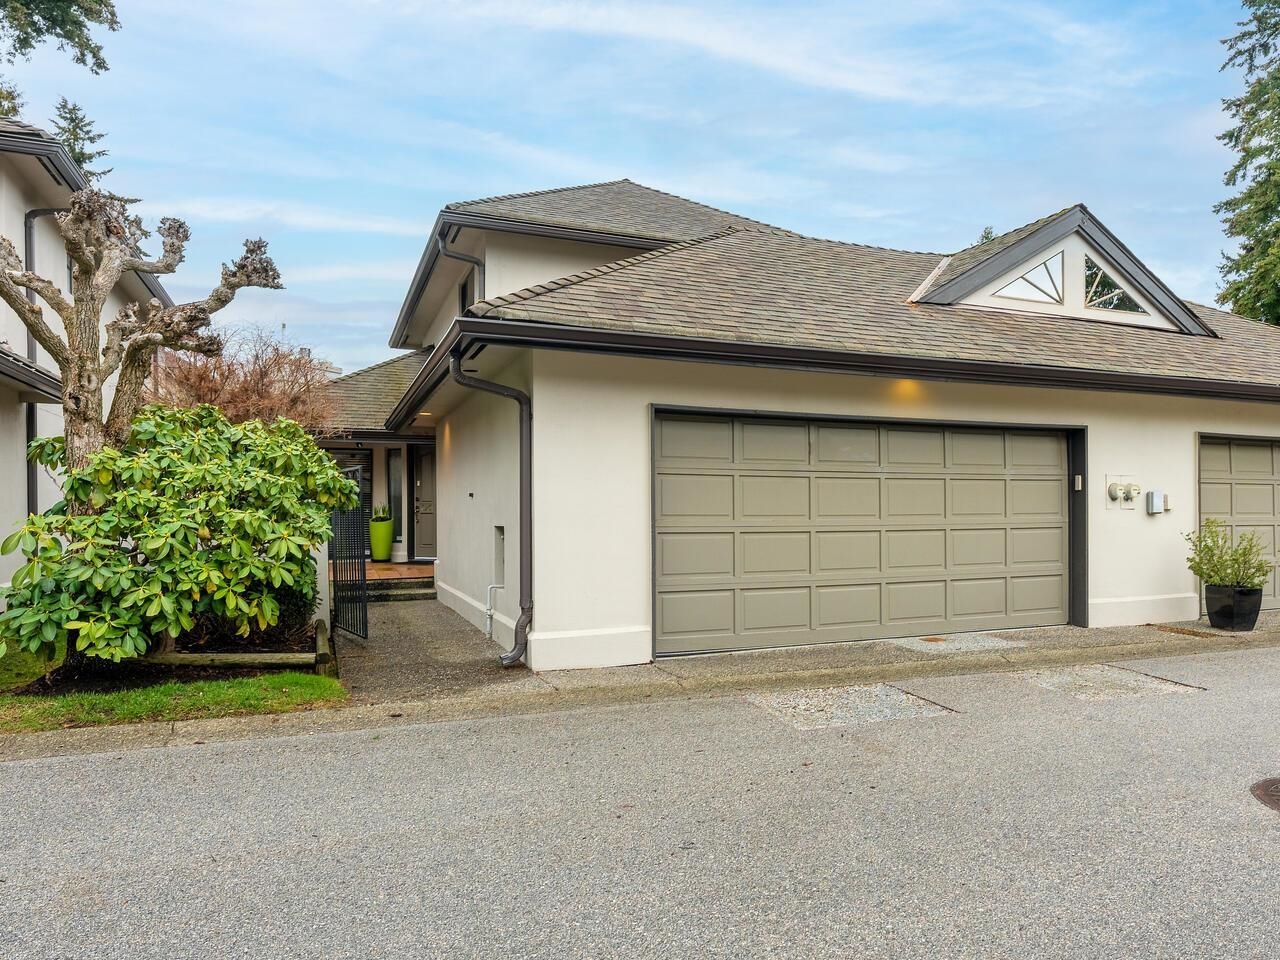 We have sold a property at 110 1770 128 ST in Surrey